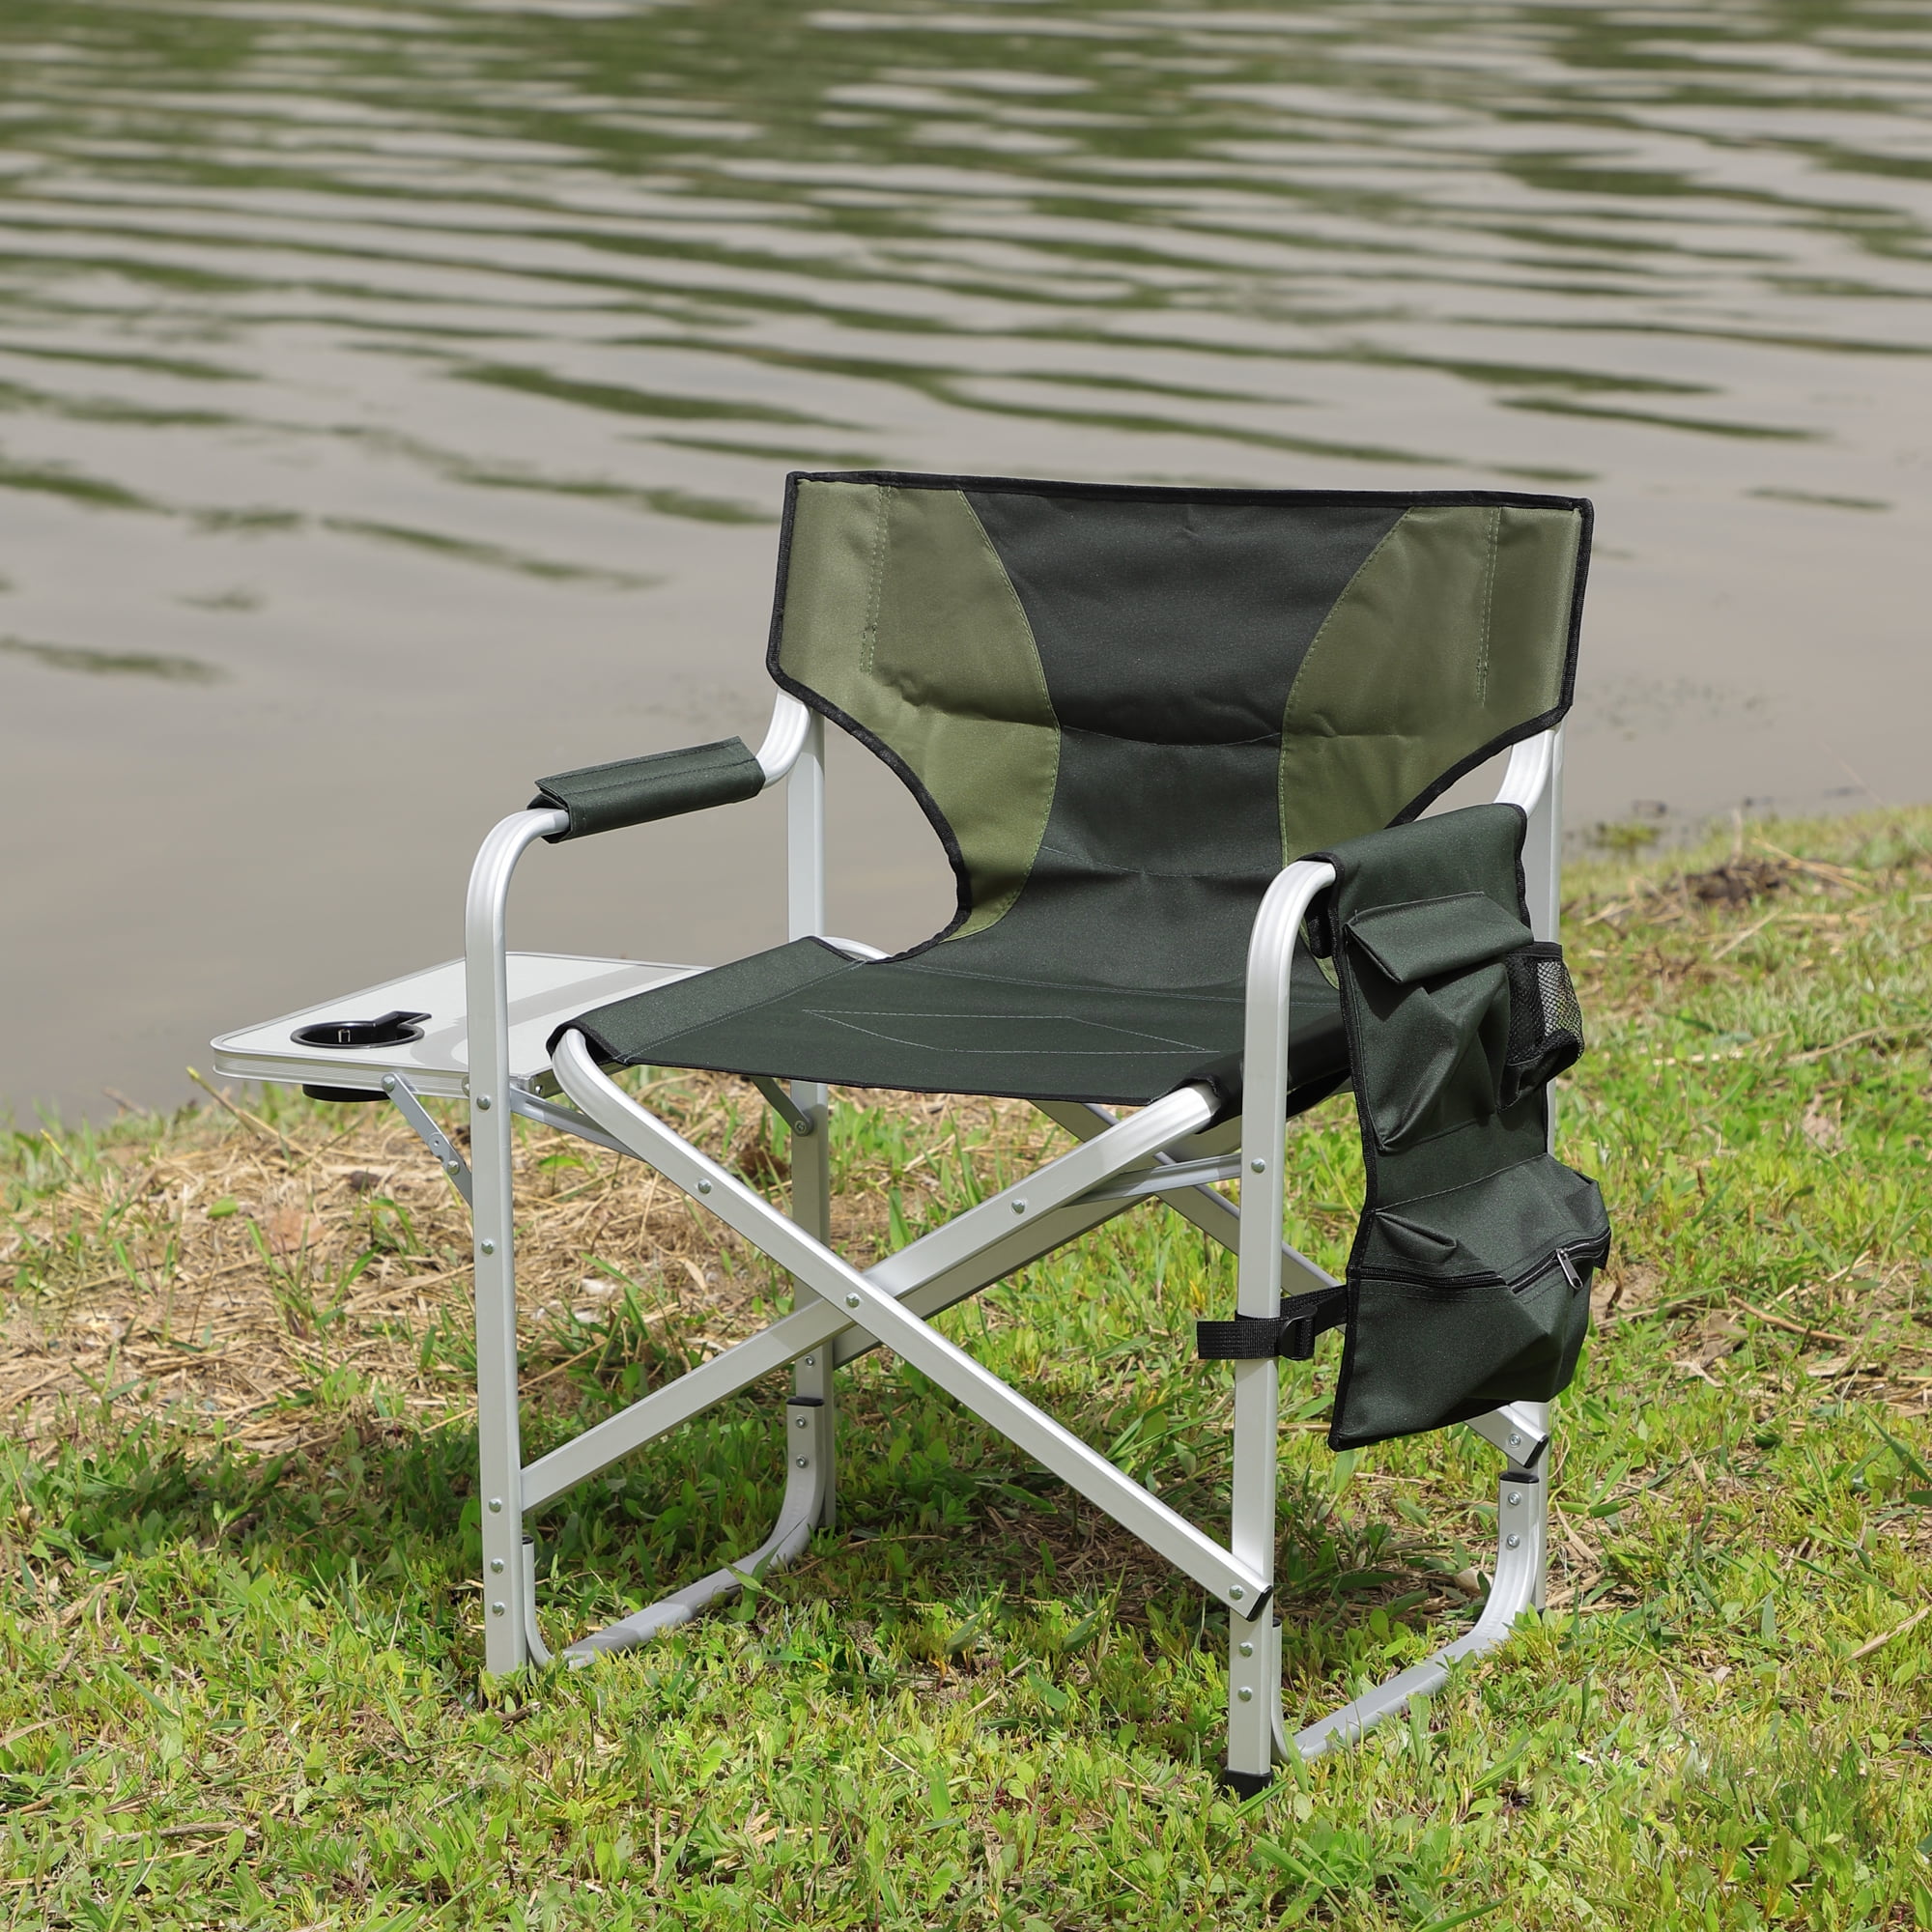 CLEARANCE! 1-piece Padded Folding Outdoor Chair with Side Table and Storage  Pockets,Lightweight Oversized Directors Chair for indoor, Outdoor Camping,  Picnics and Fishing,Green